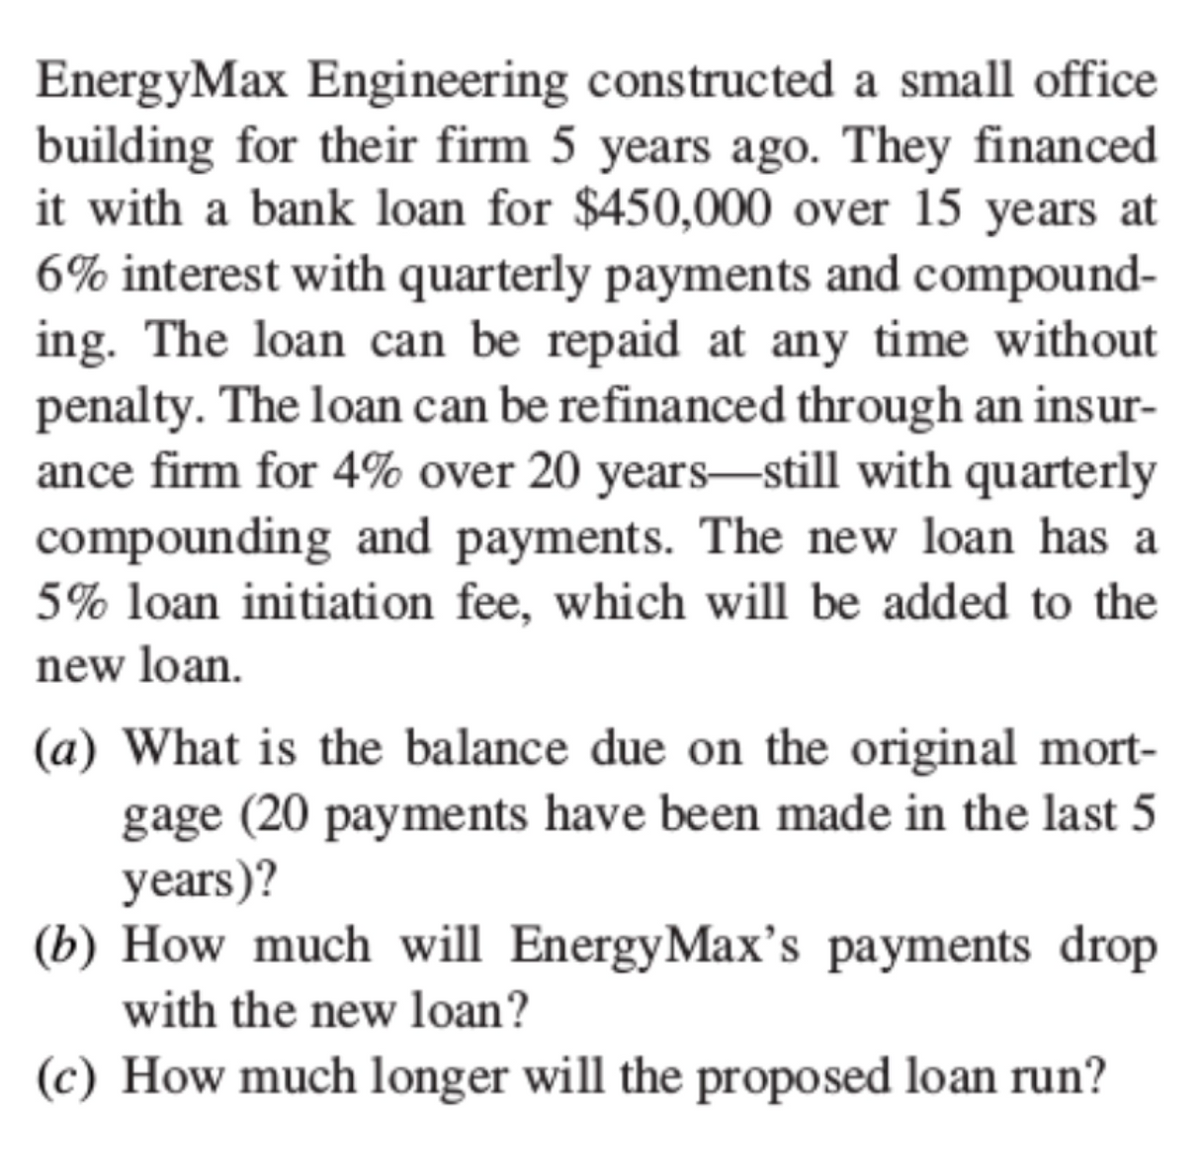 EnergyMax Engineering constructed a small office
building for their firm 5 years ago. They financed
it with a bank loan for $450,000 over 15 years at
6% interest with quarterly payments and compound-
ing. The loan can be repaid at any time without
penalty. The loan can be refinanced through an insur-
ance firm for 4% over 20 years-still with quarterly
compounding and payments. The new loan has a
5% loan initiation fee, which will be added to the
new loan.
(a) What is the balance due on the original mort-
gage (20 payments have been made in the last 5
years)?
(b) How much will EnergyMax's payments drop
with the new loan?
(c) How much longer will the proposed loan run?
